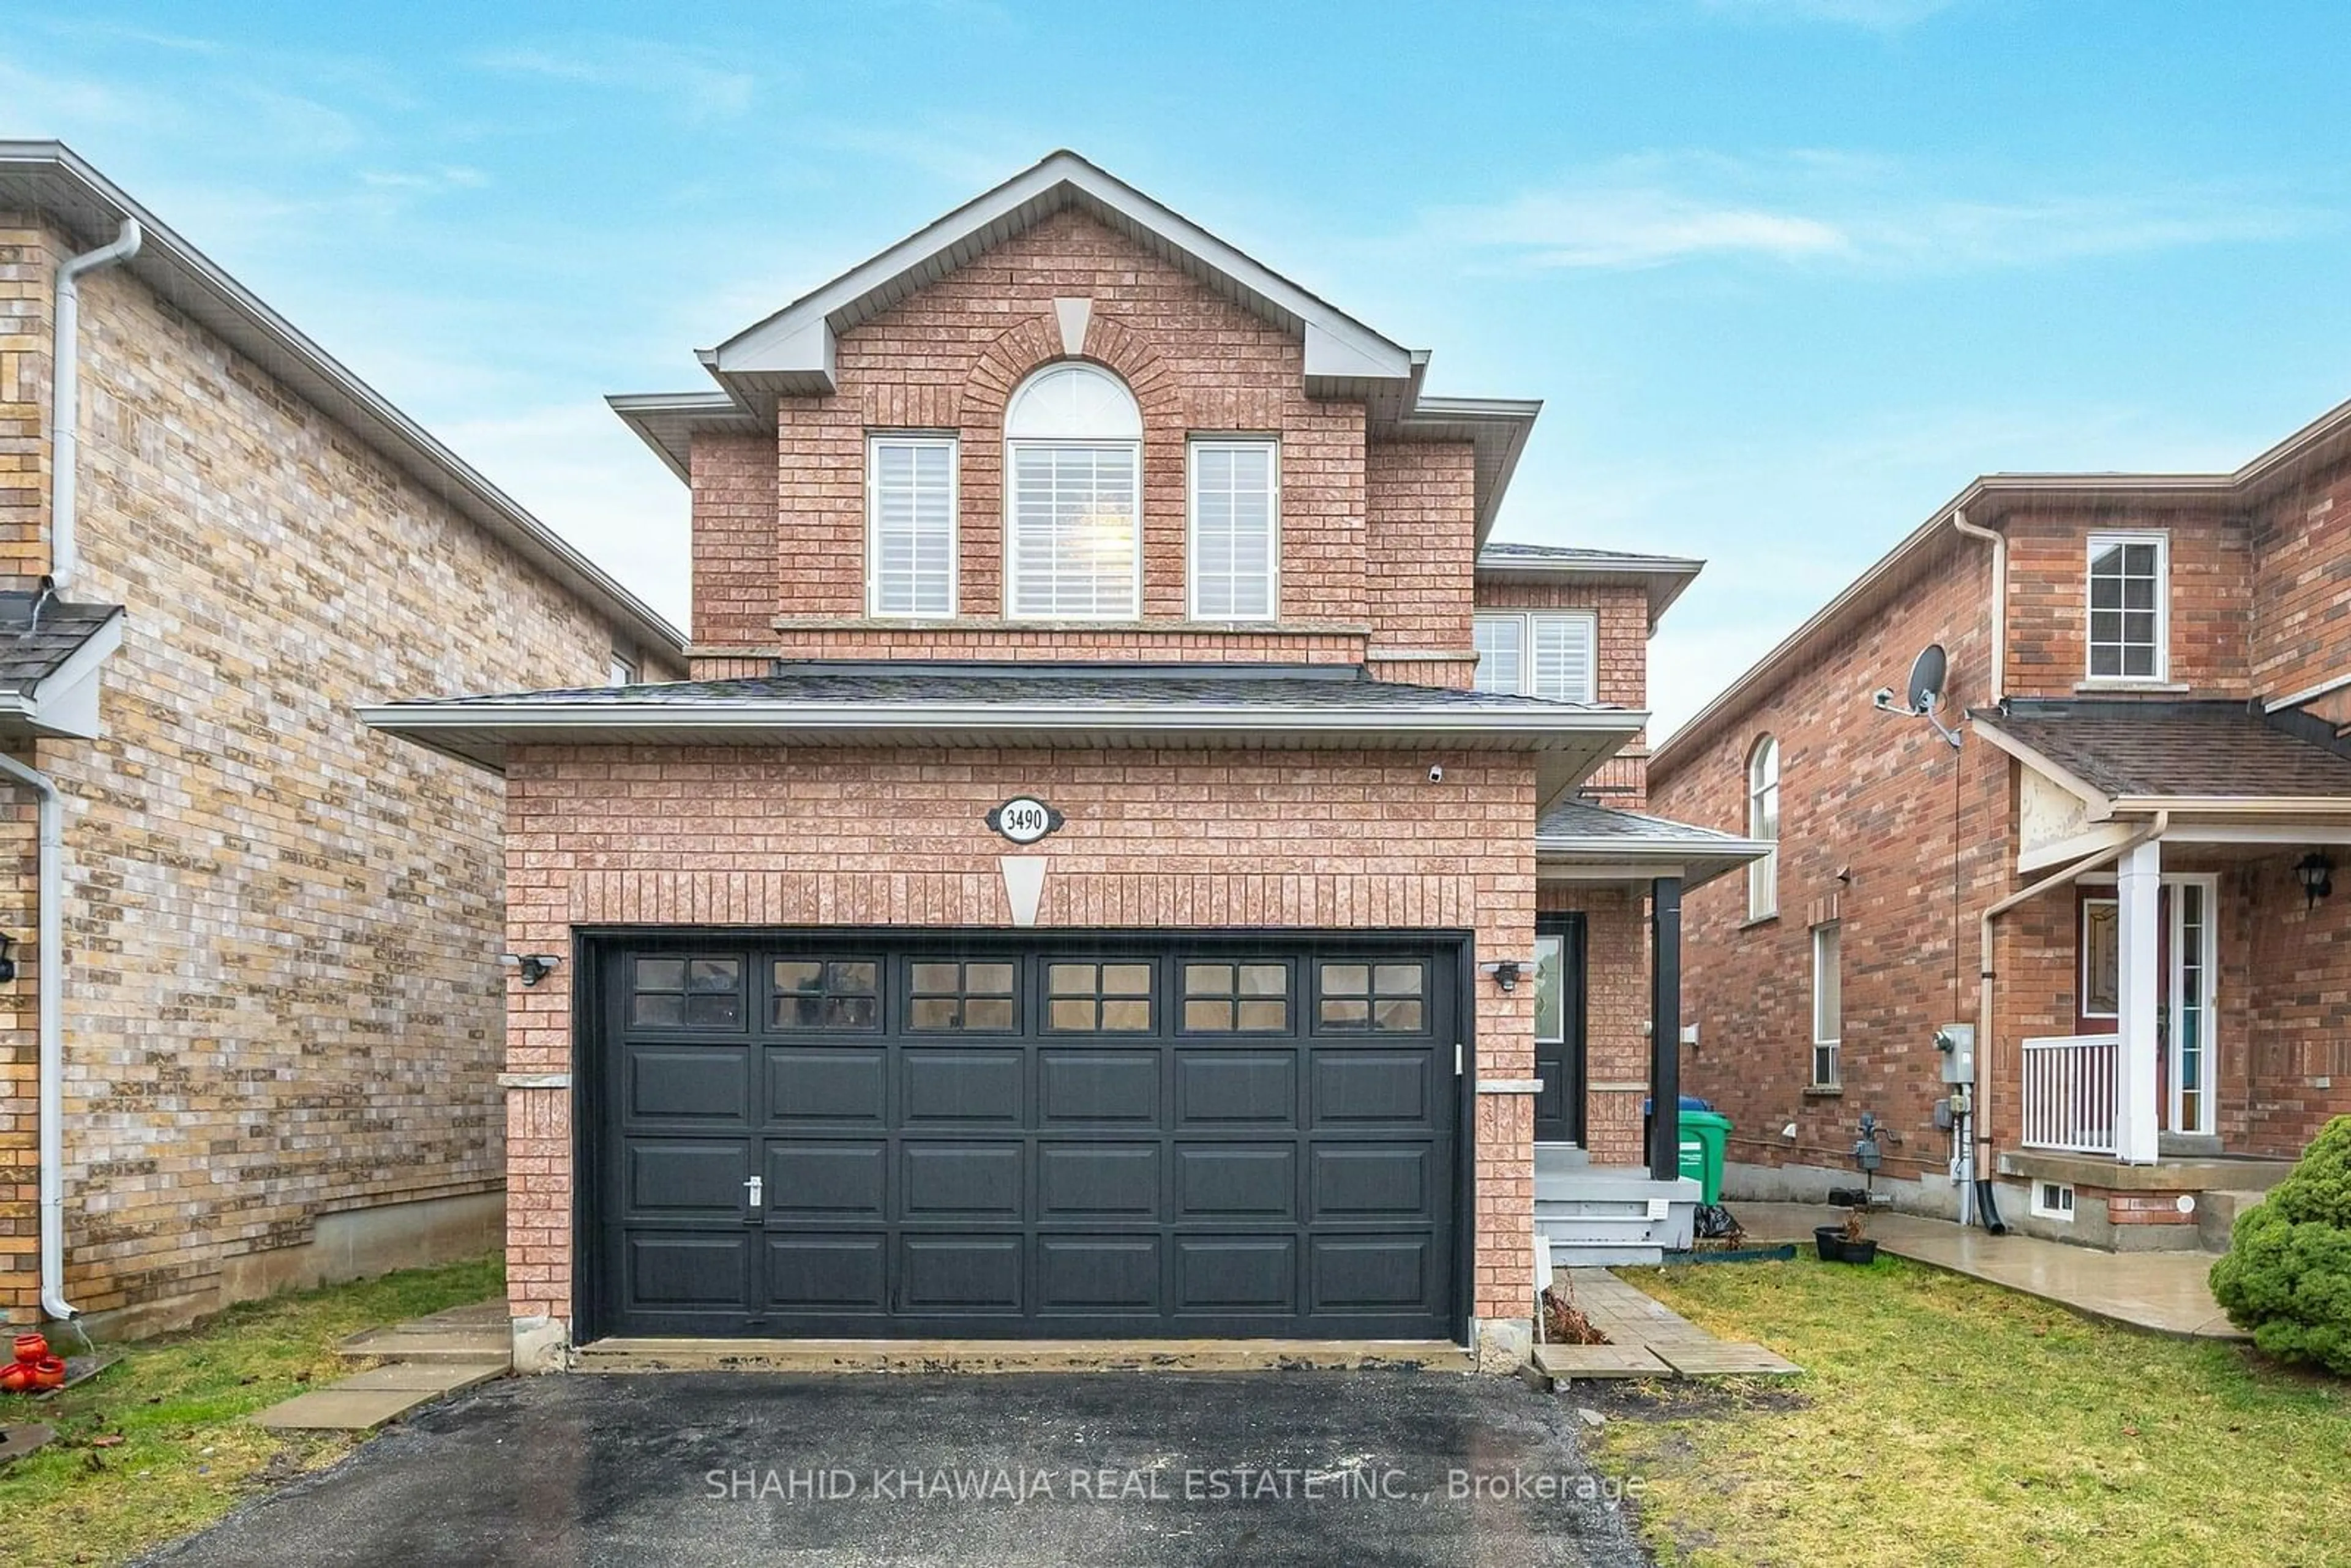 Home with brick exterior material for 3490 Crimson King Circ, Mississauga Ontario L5N 8M8